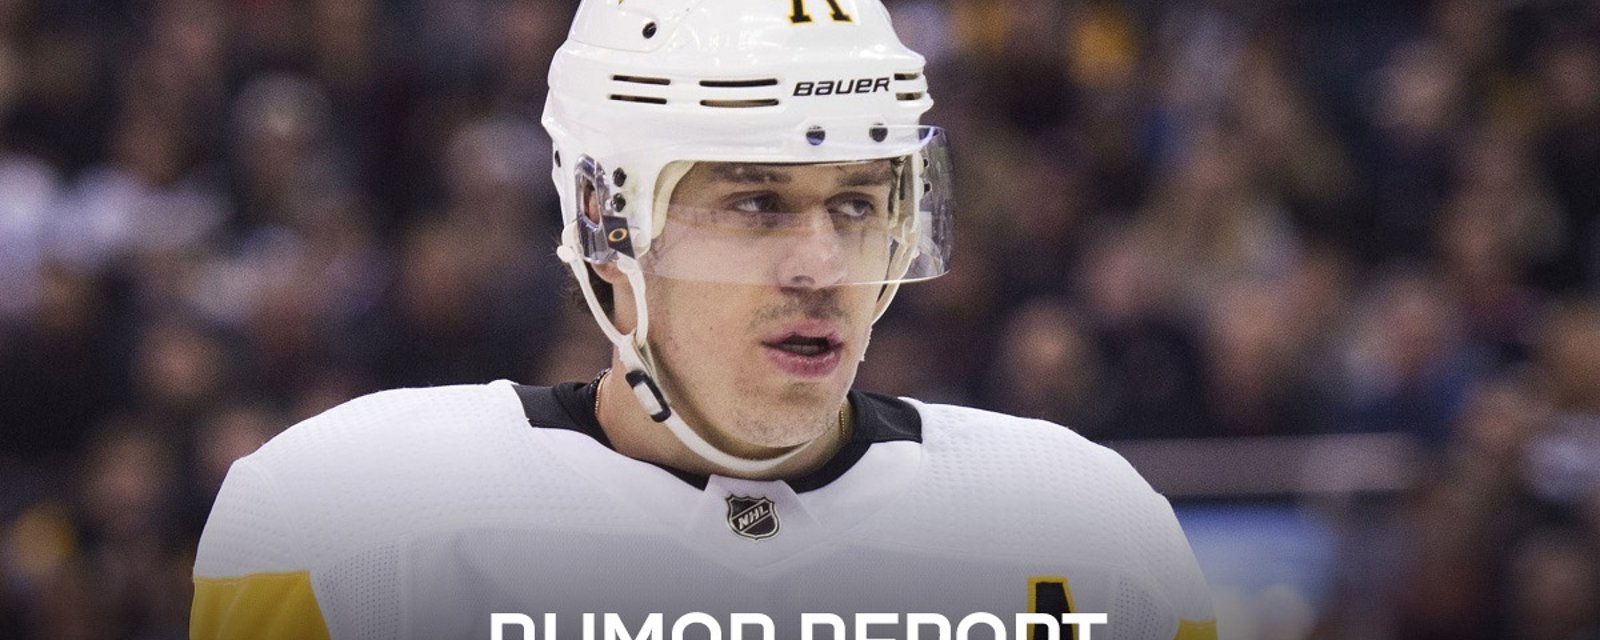 Rumor: Evgeni Malkin “requested” a trade from the Penguins.